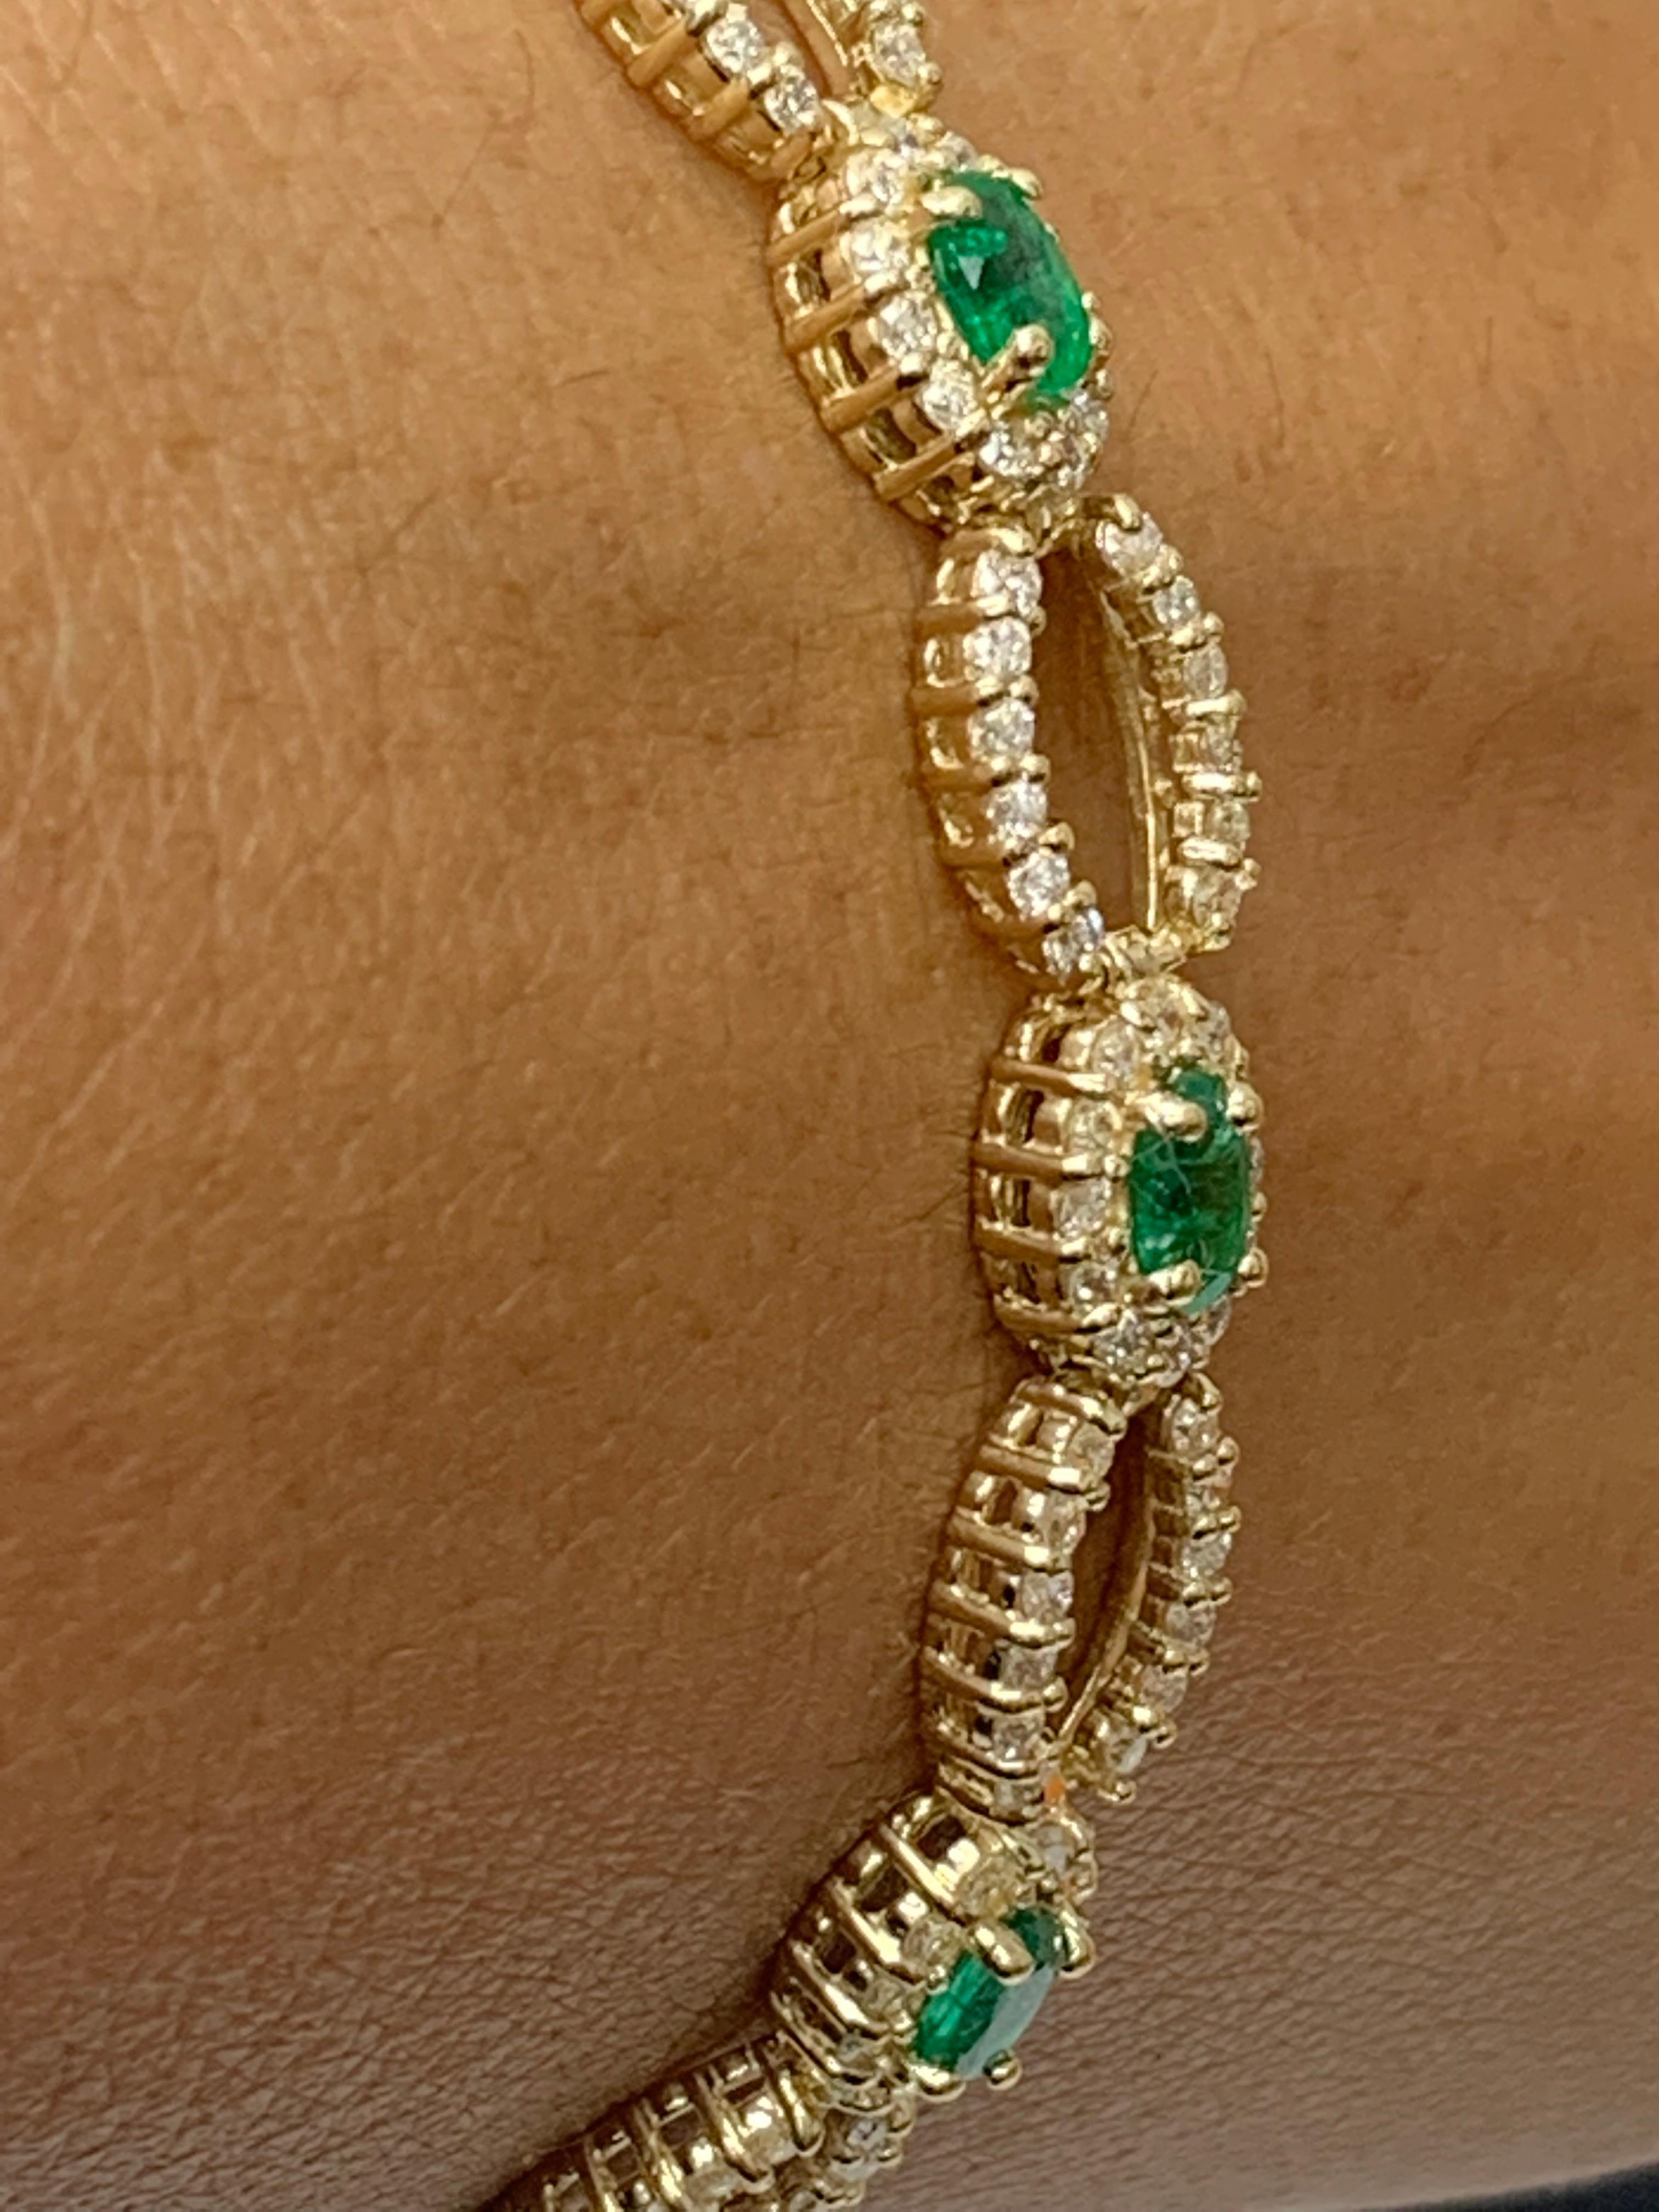 Open-Work 2.13 Carat Emerald and Diamond Bracelet in 14K Yellow Gold For Sale 2